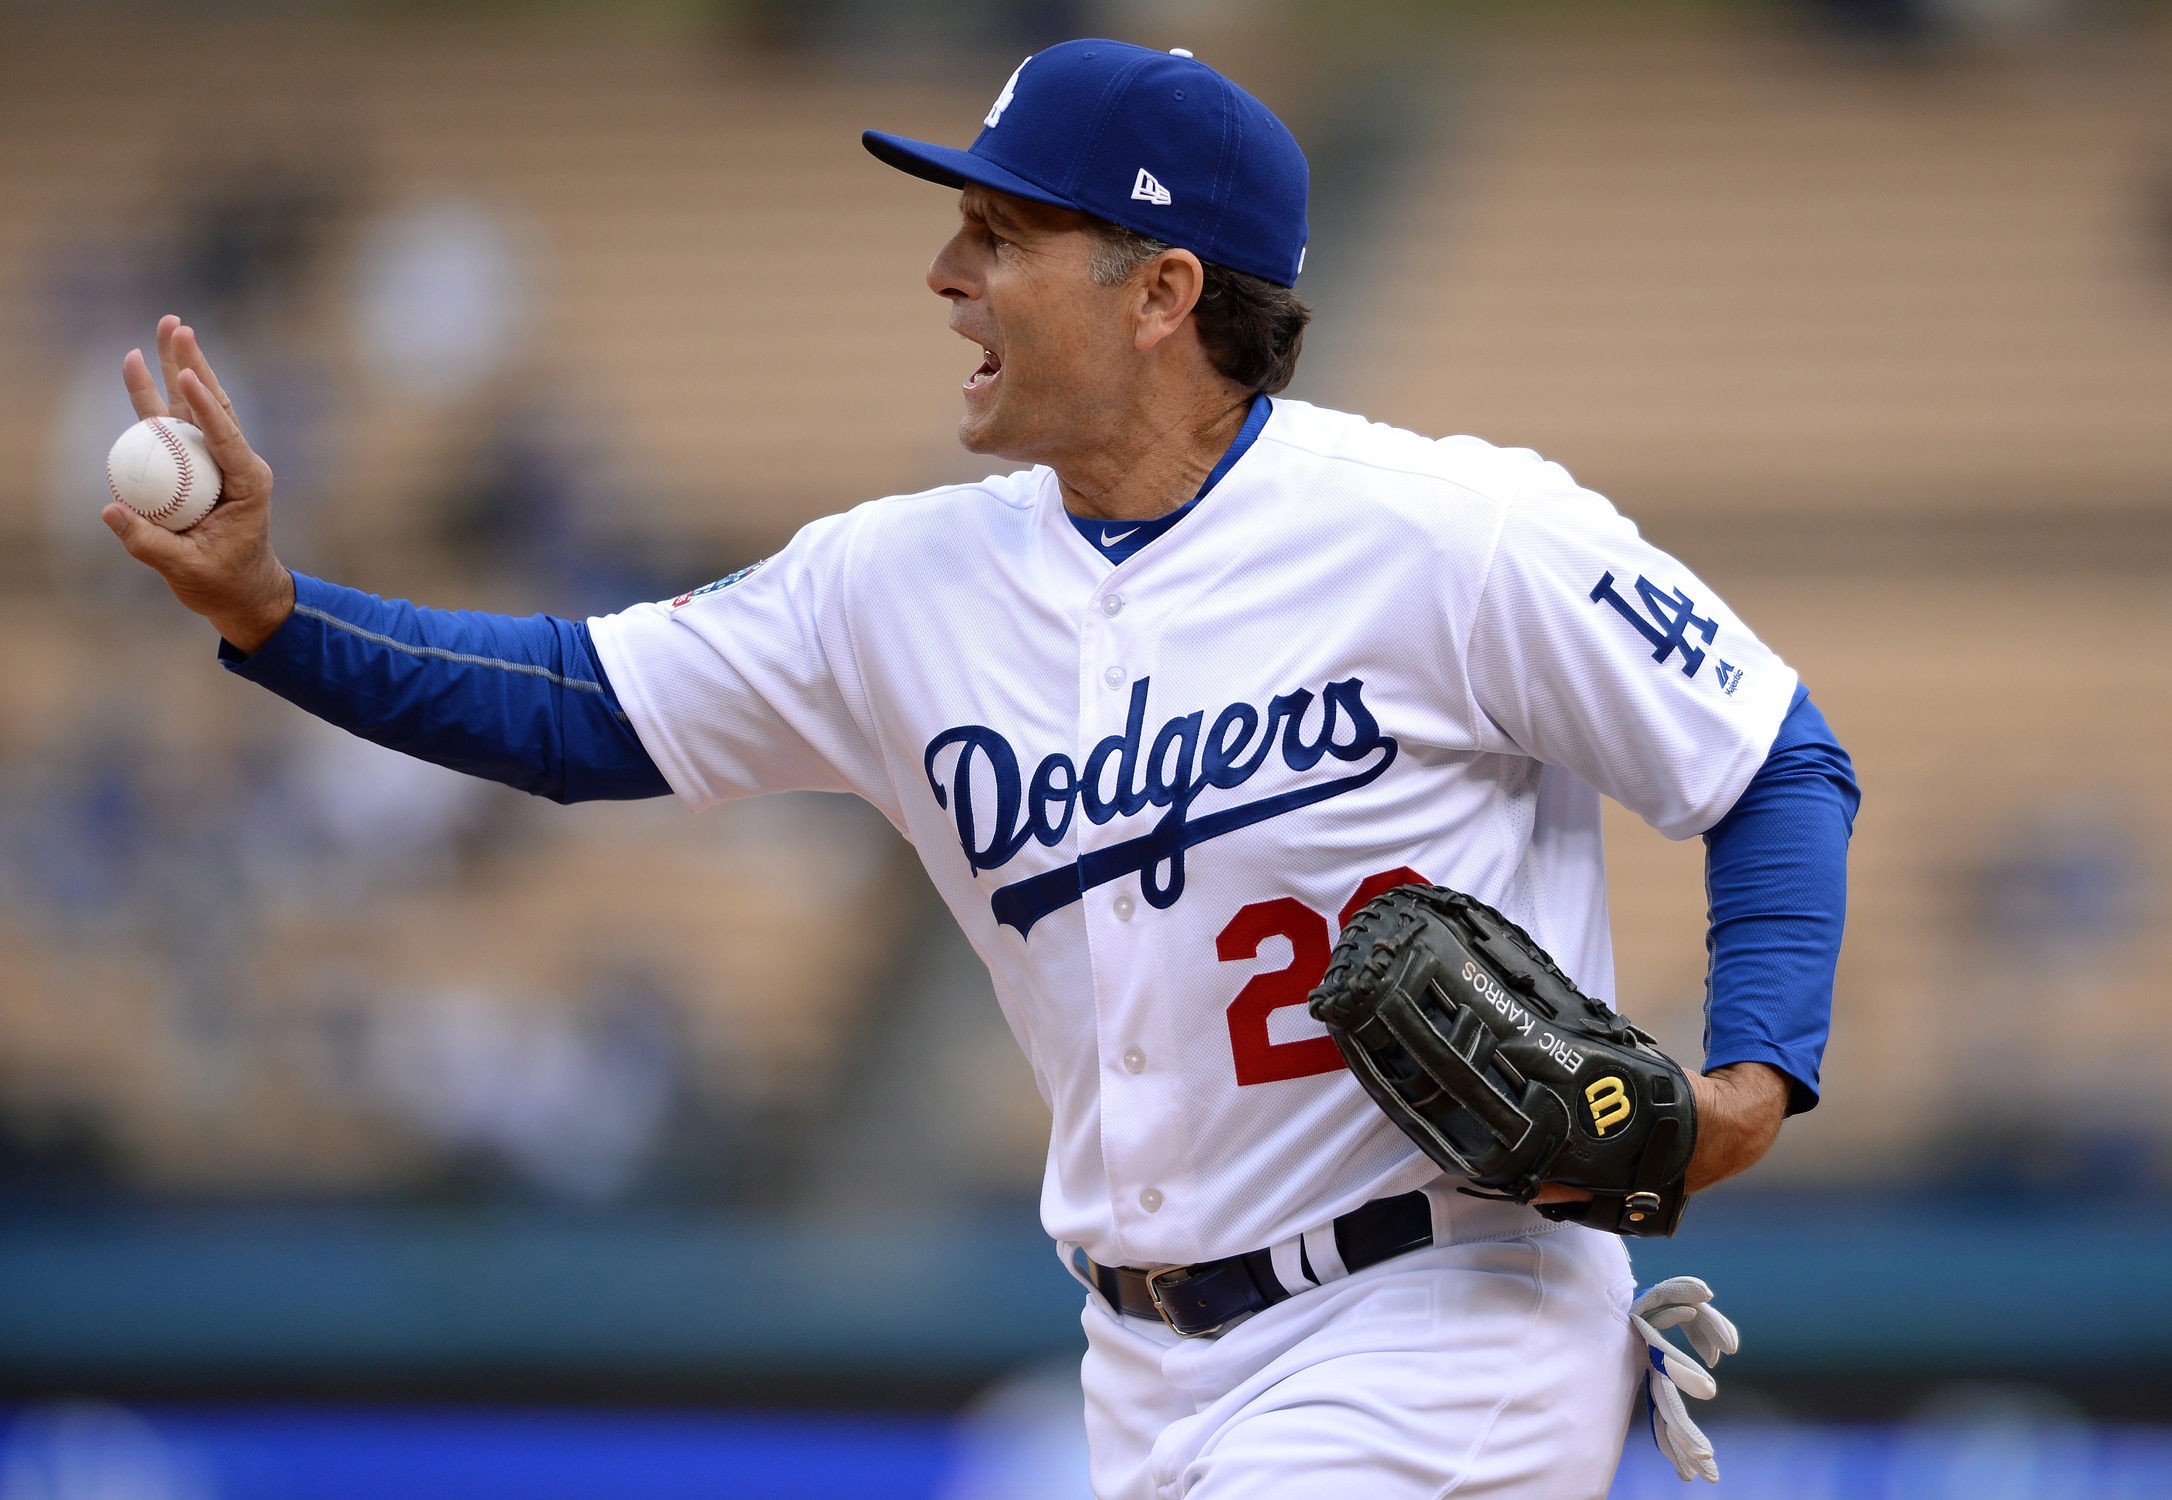 Dodgers: Eric Karros Expects 'Significant Difference' in Next Year's Roster